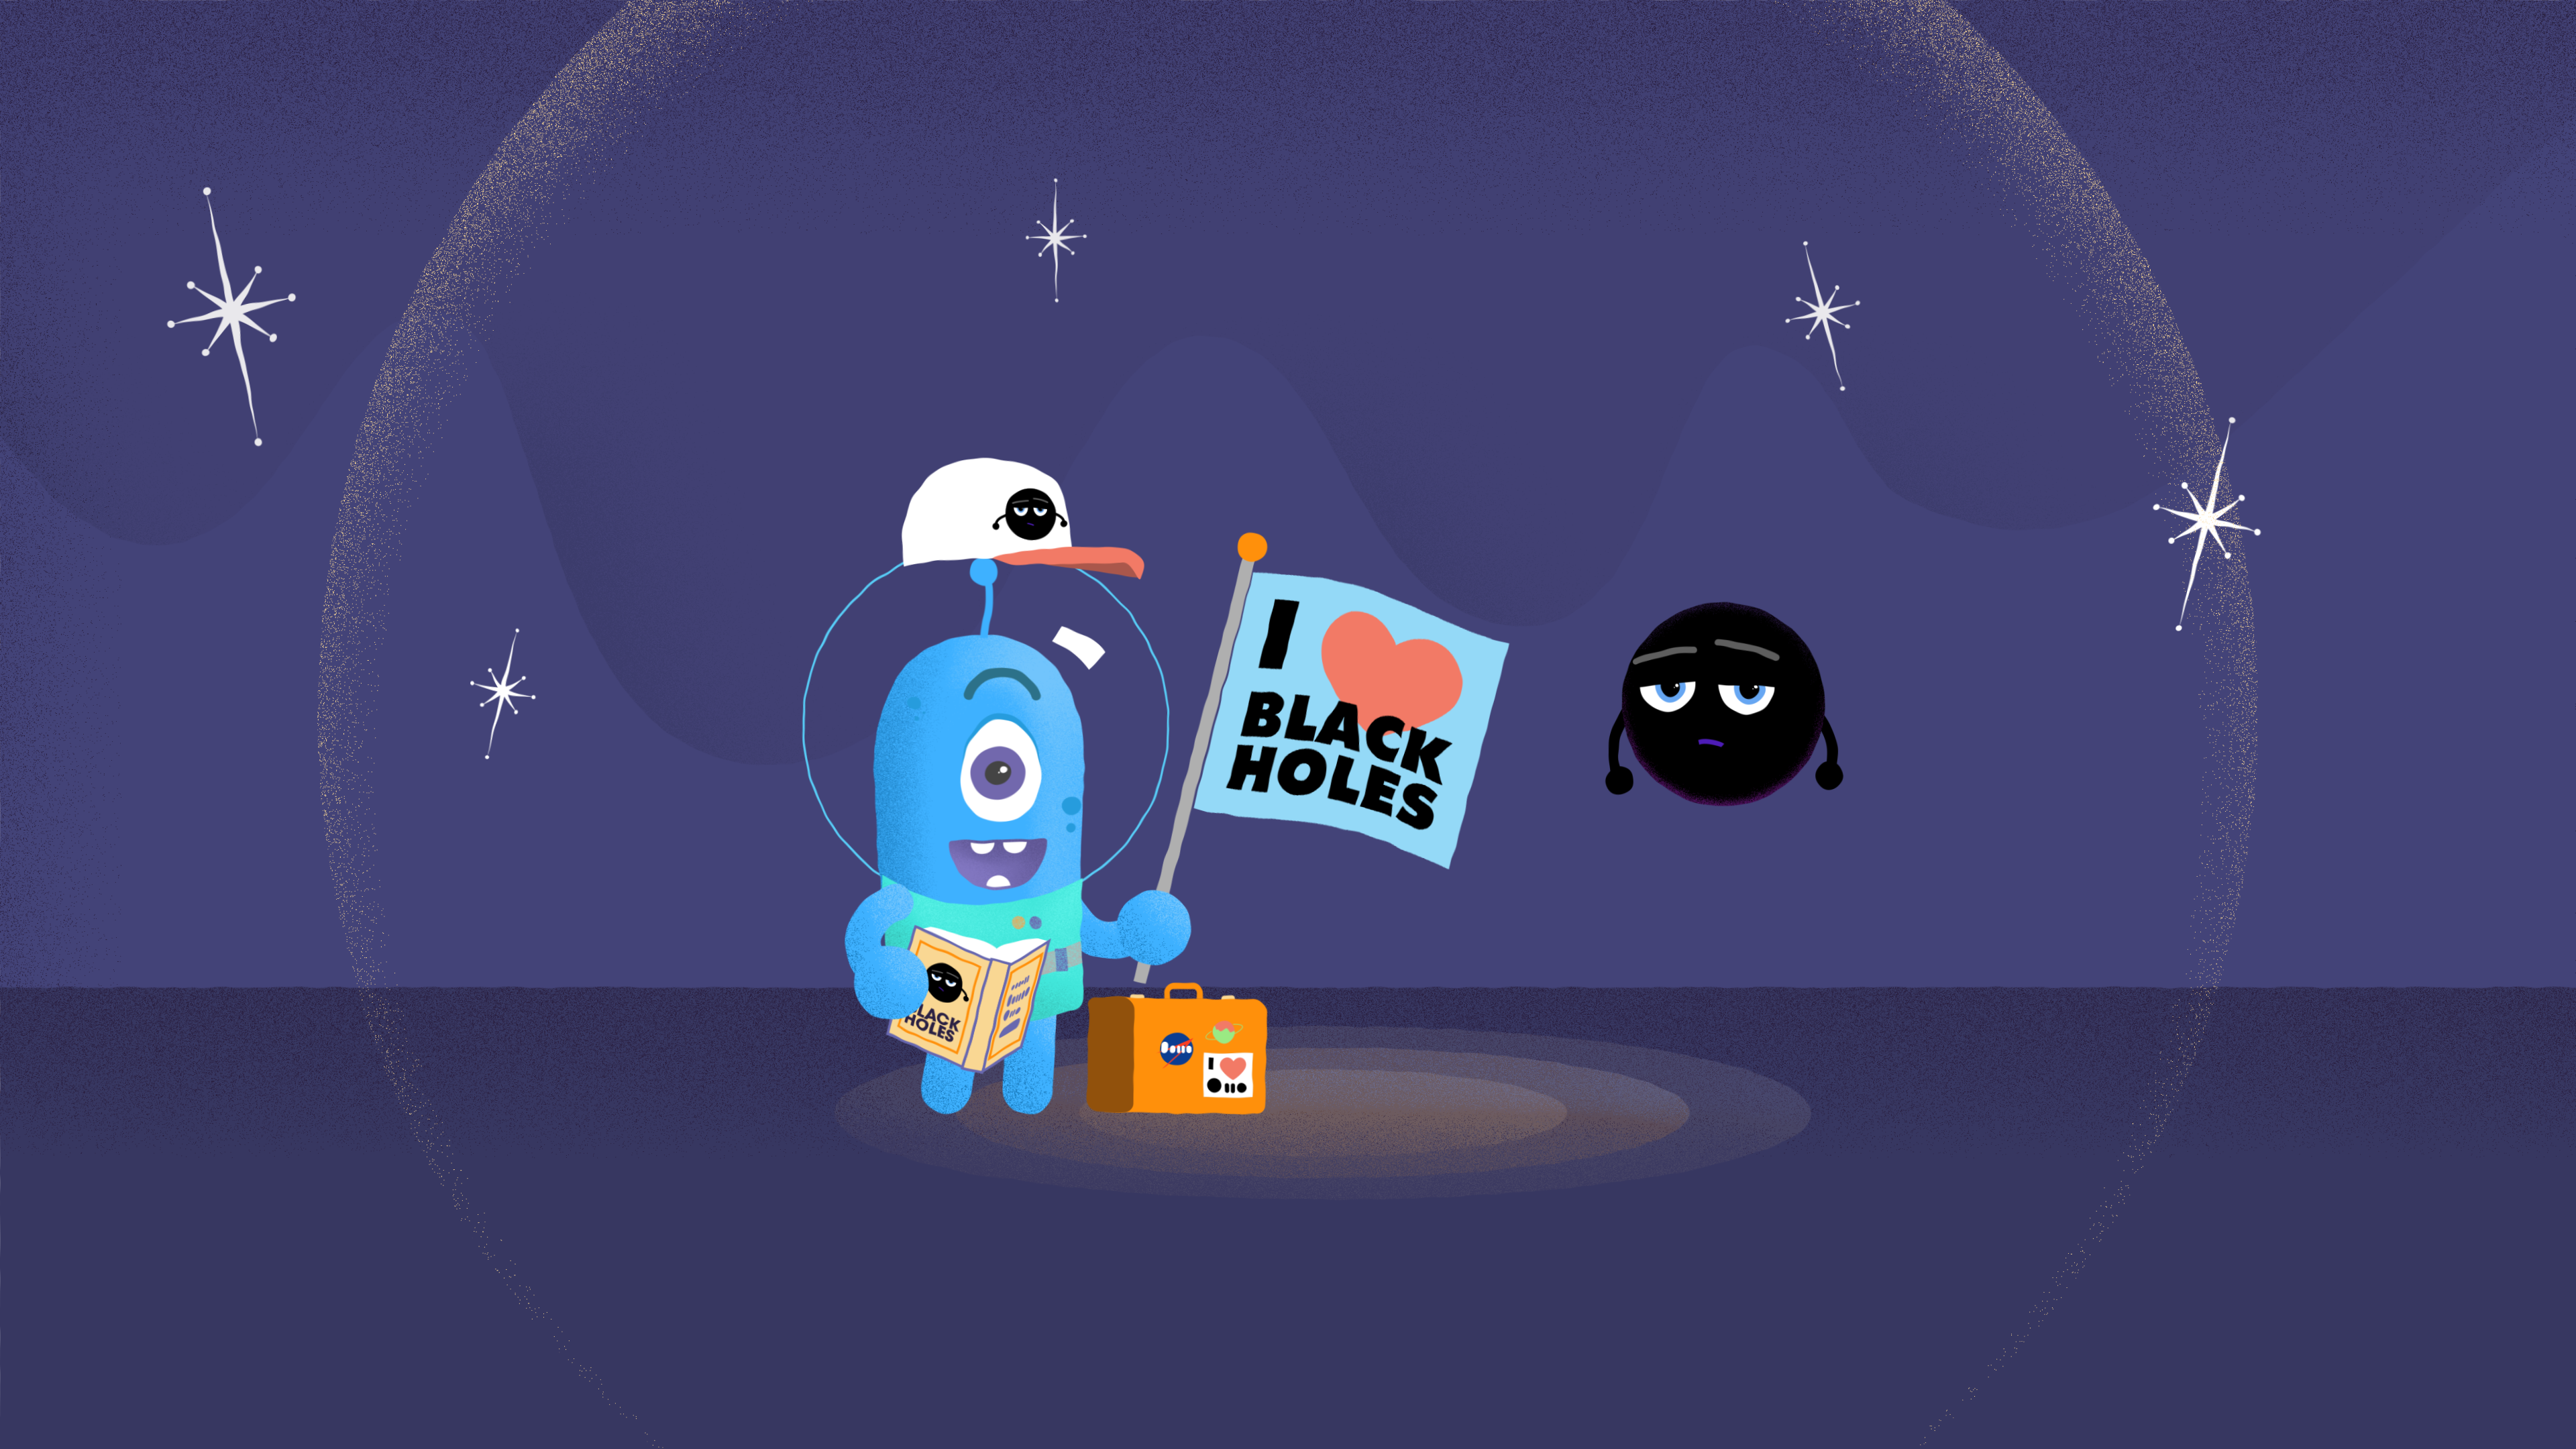 Image showing a blue cartoon character and a black hole.